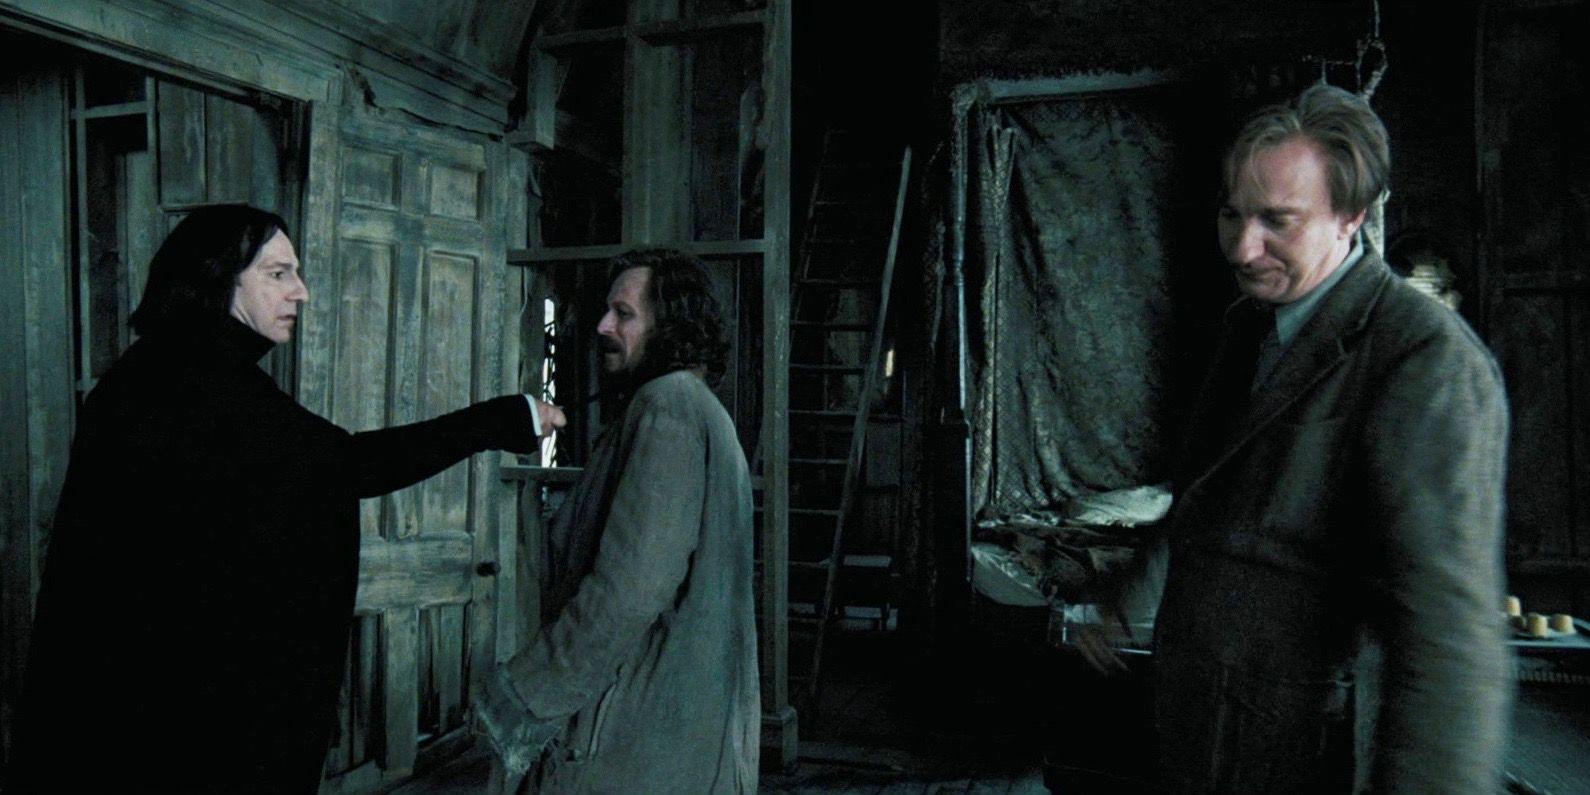 Snape and Sirius fight in the Shrieking Shack as Lupin looks on in Harry Potter